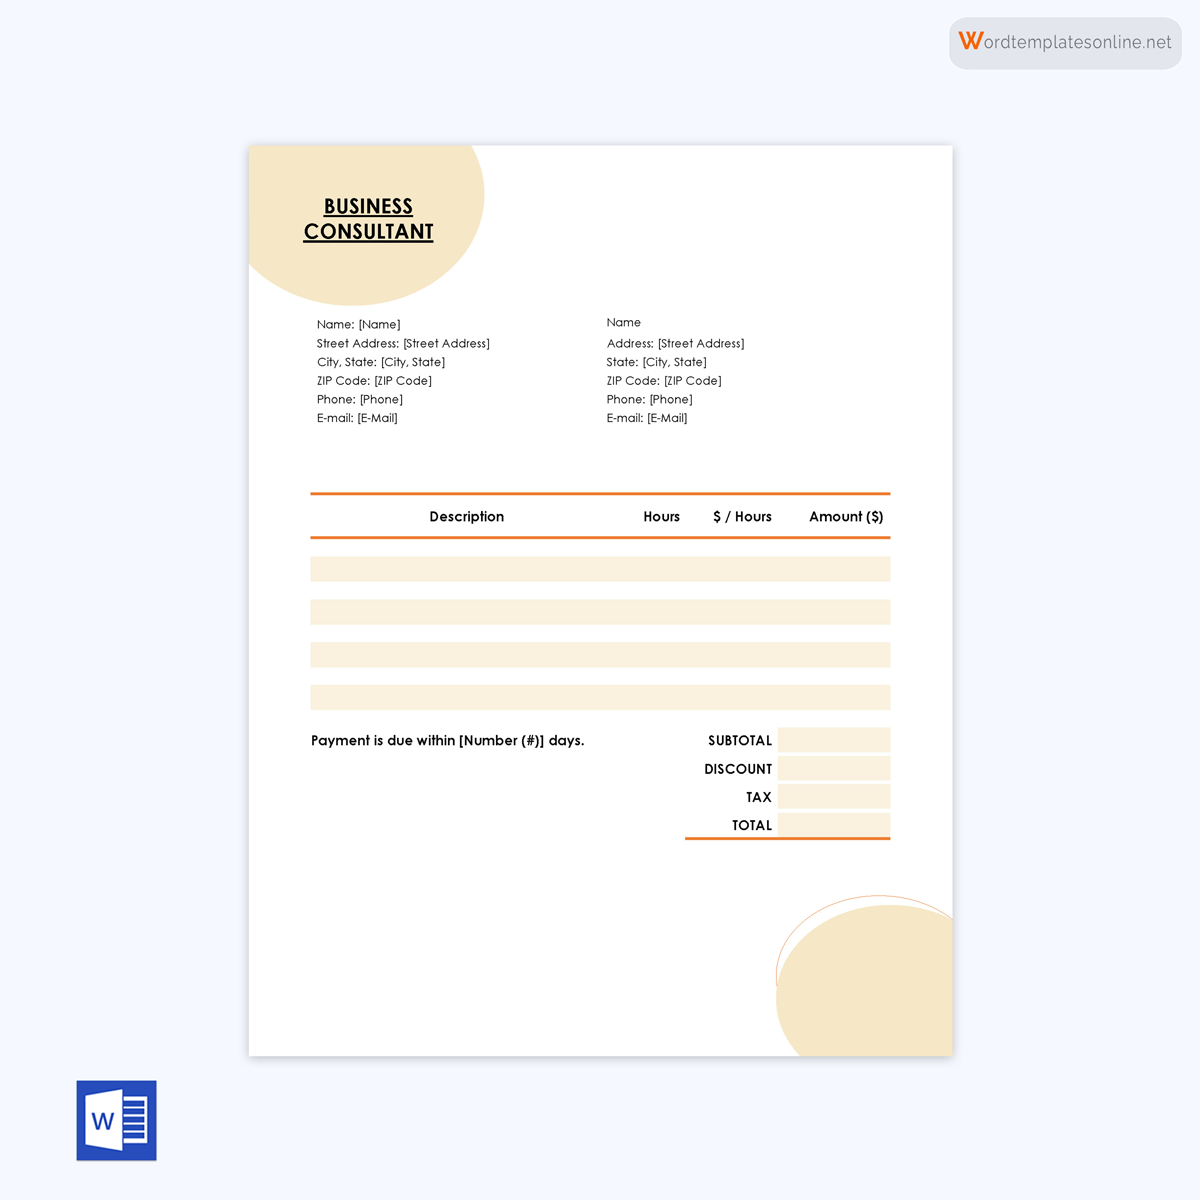 Business Consultant invoice template - editable PDF form